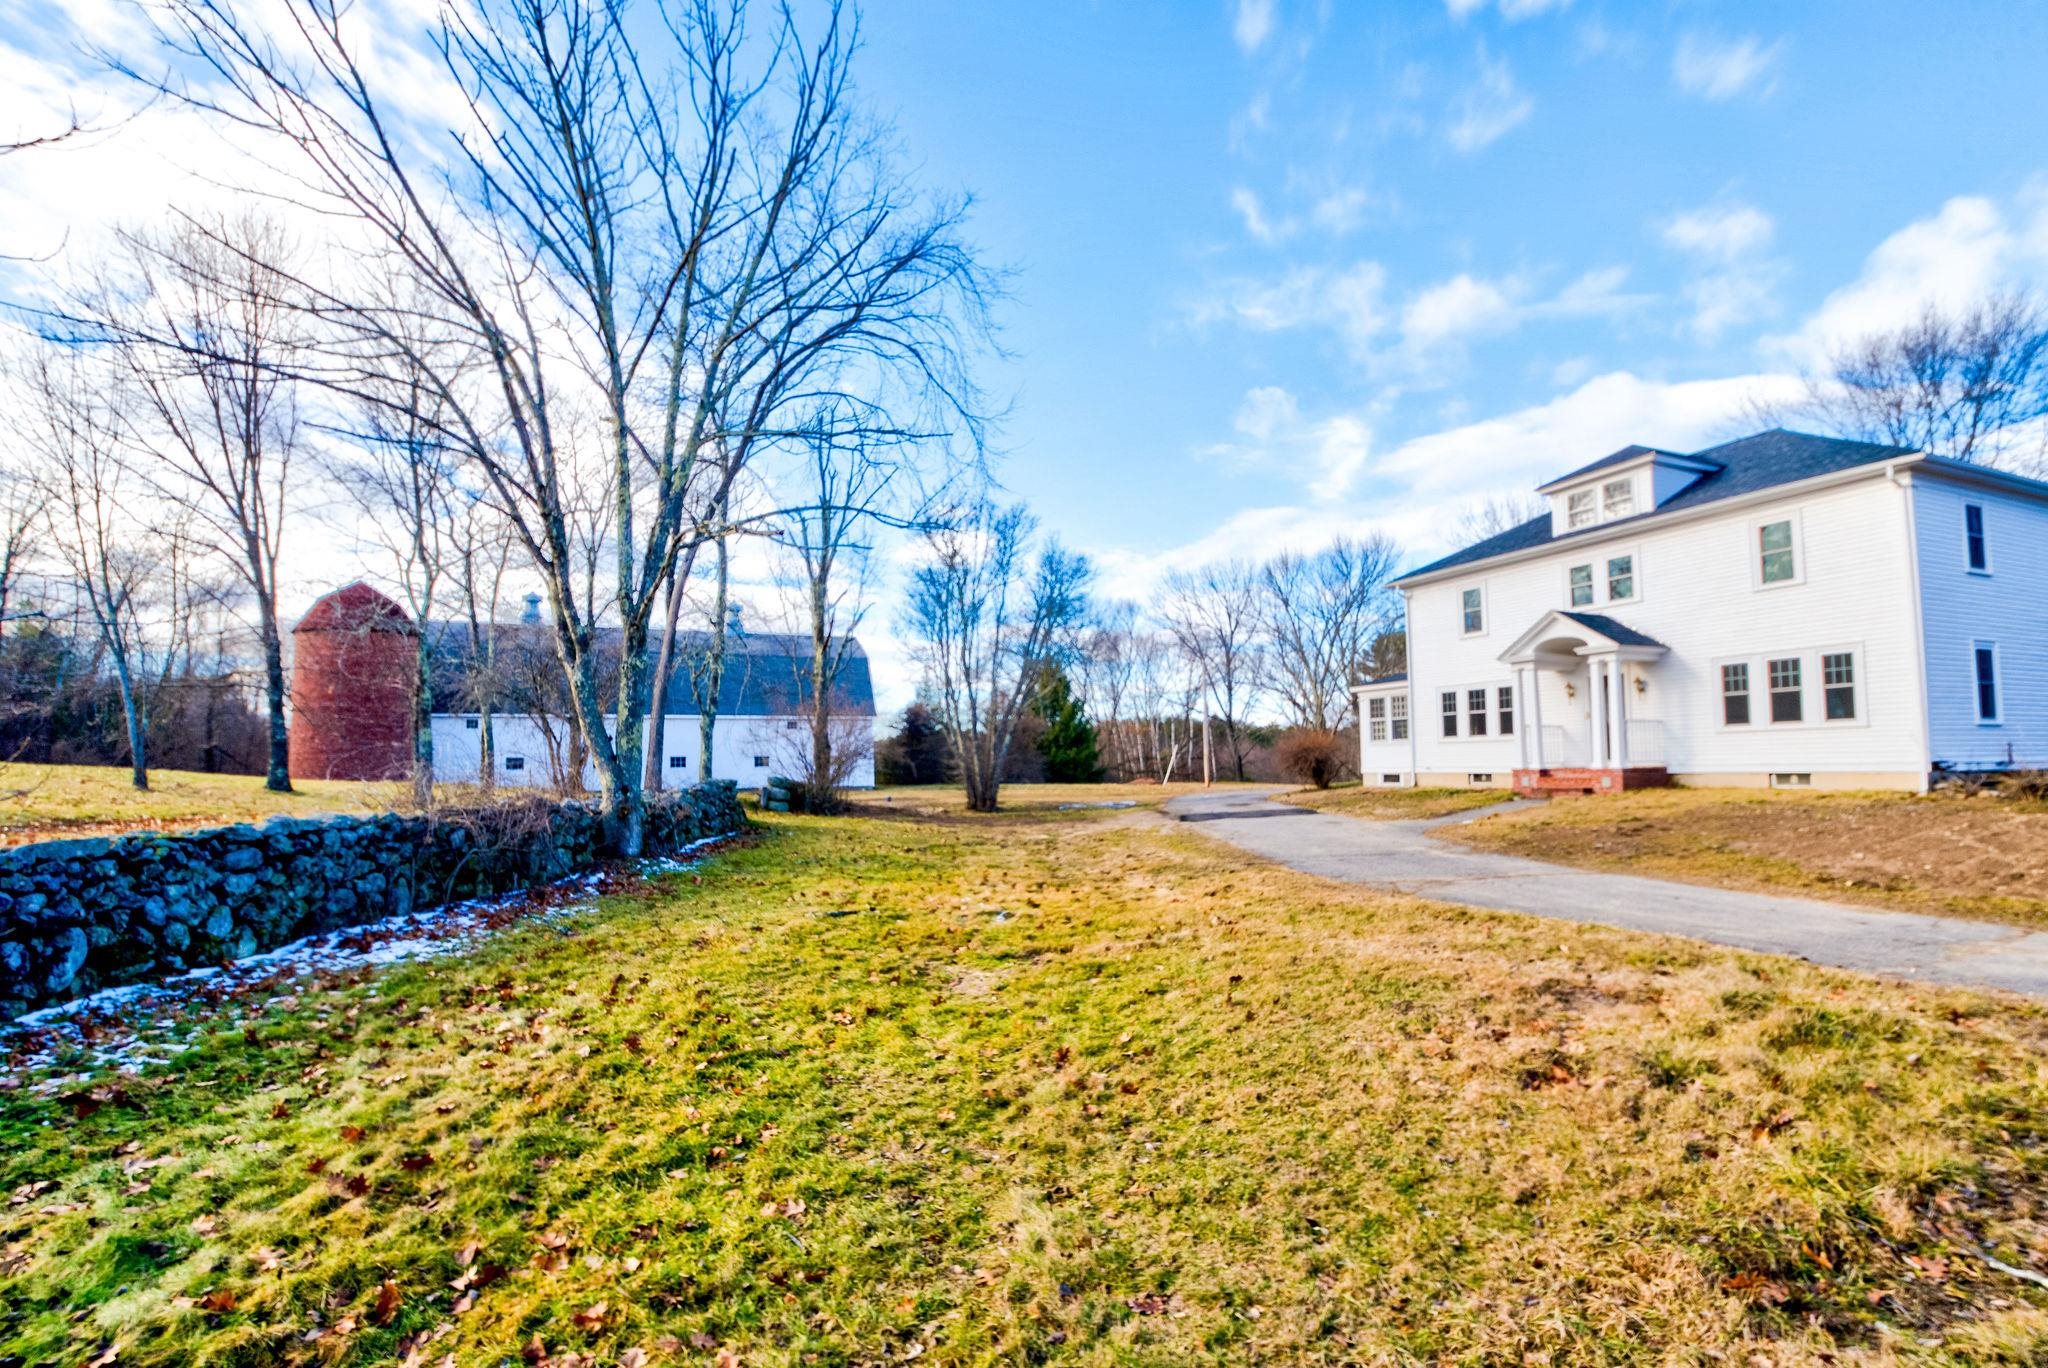 98 Castle Hill Road, Windham, NH 03087